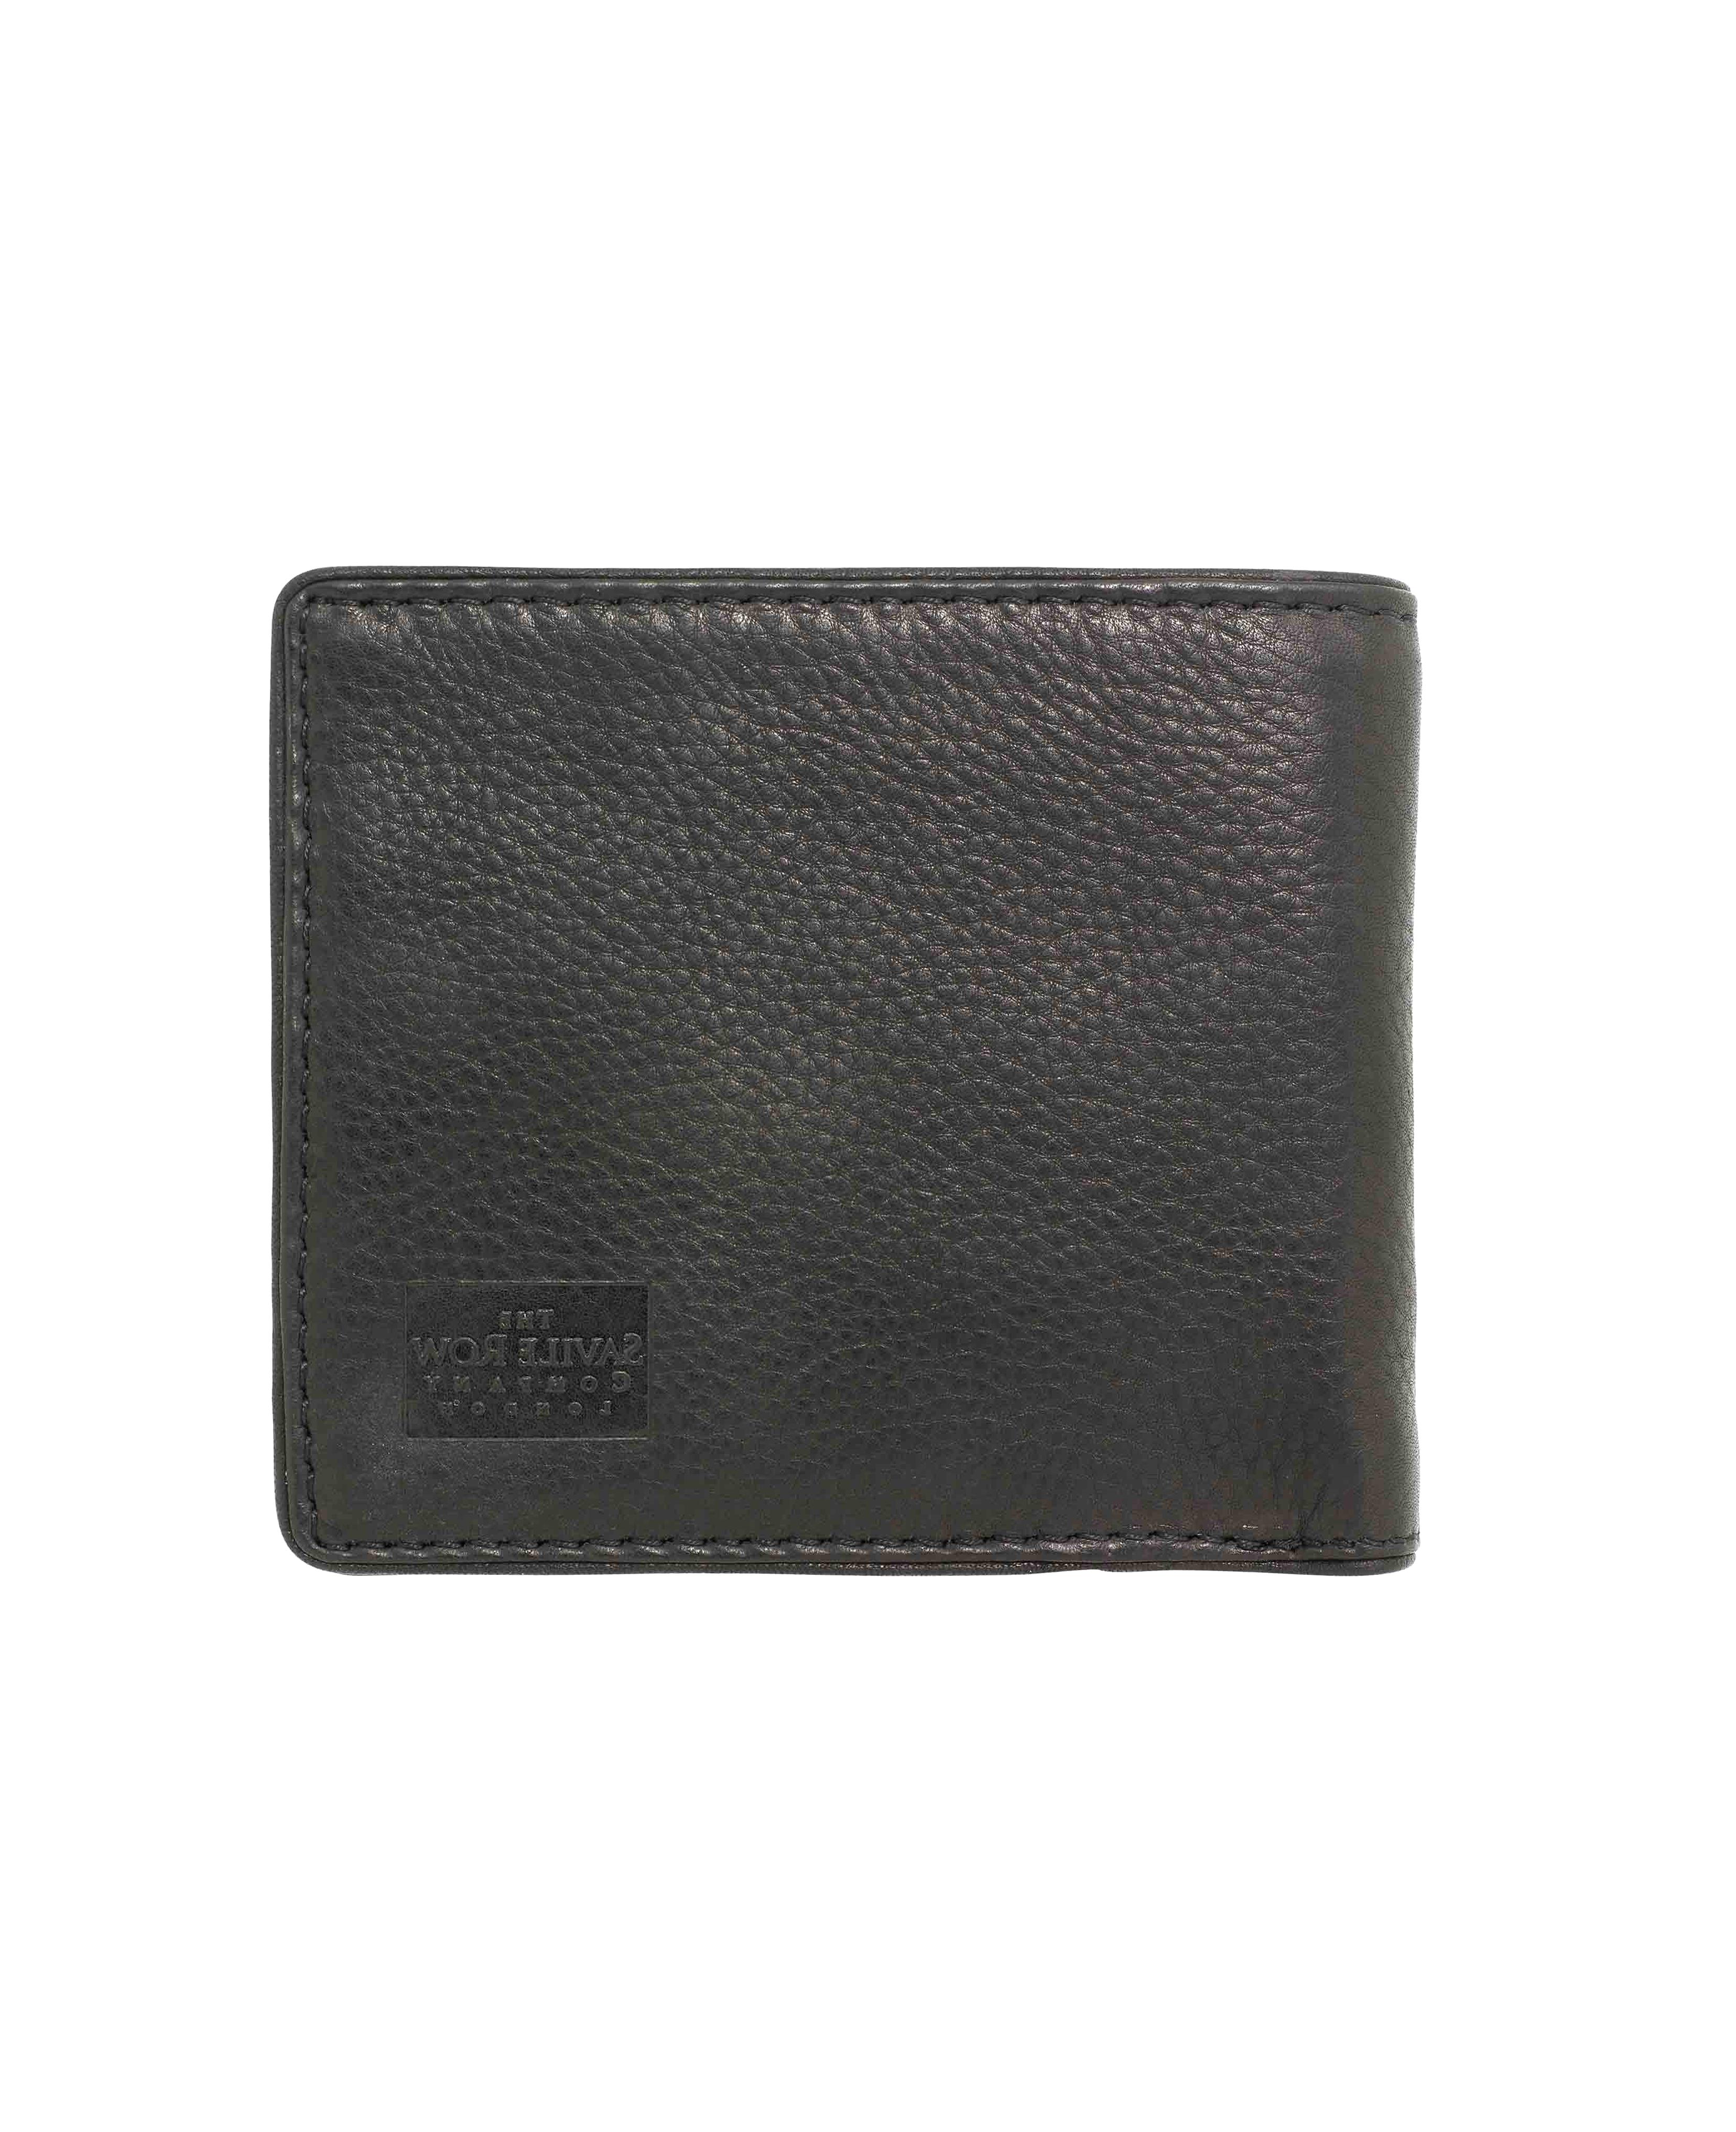 Savile Row Wallet for sale in UK | 38 used Savile Row Wallets